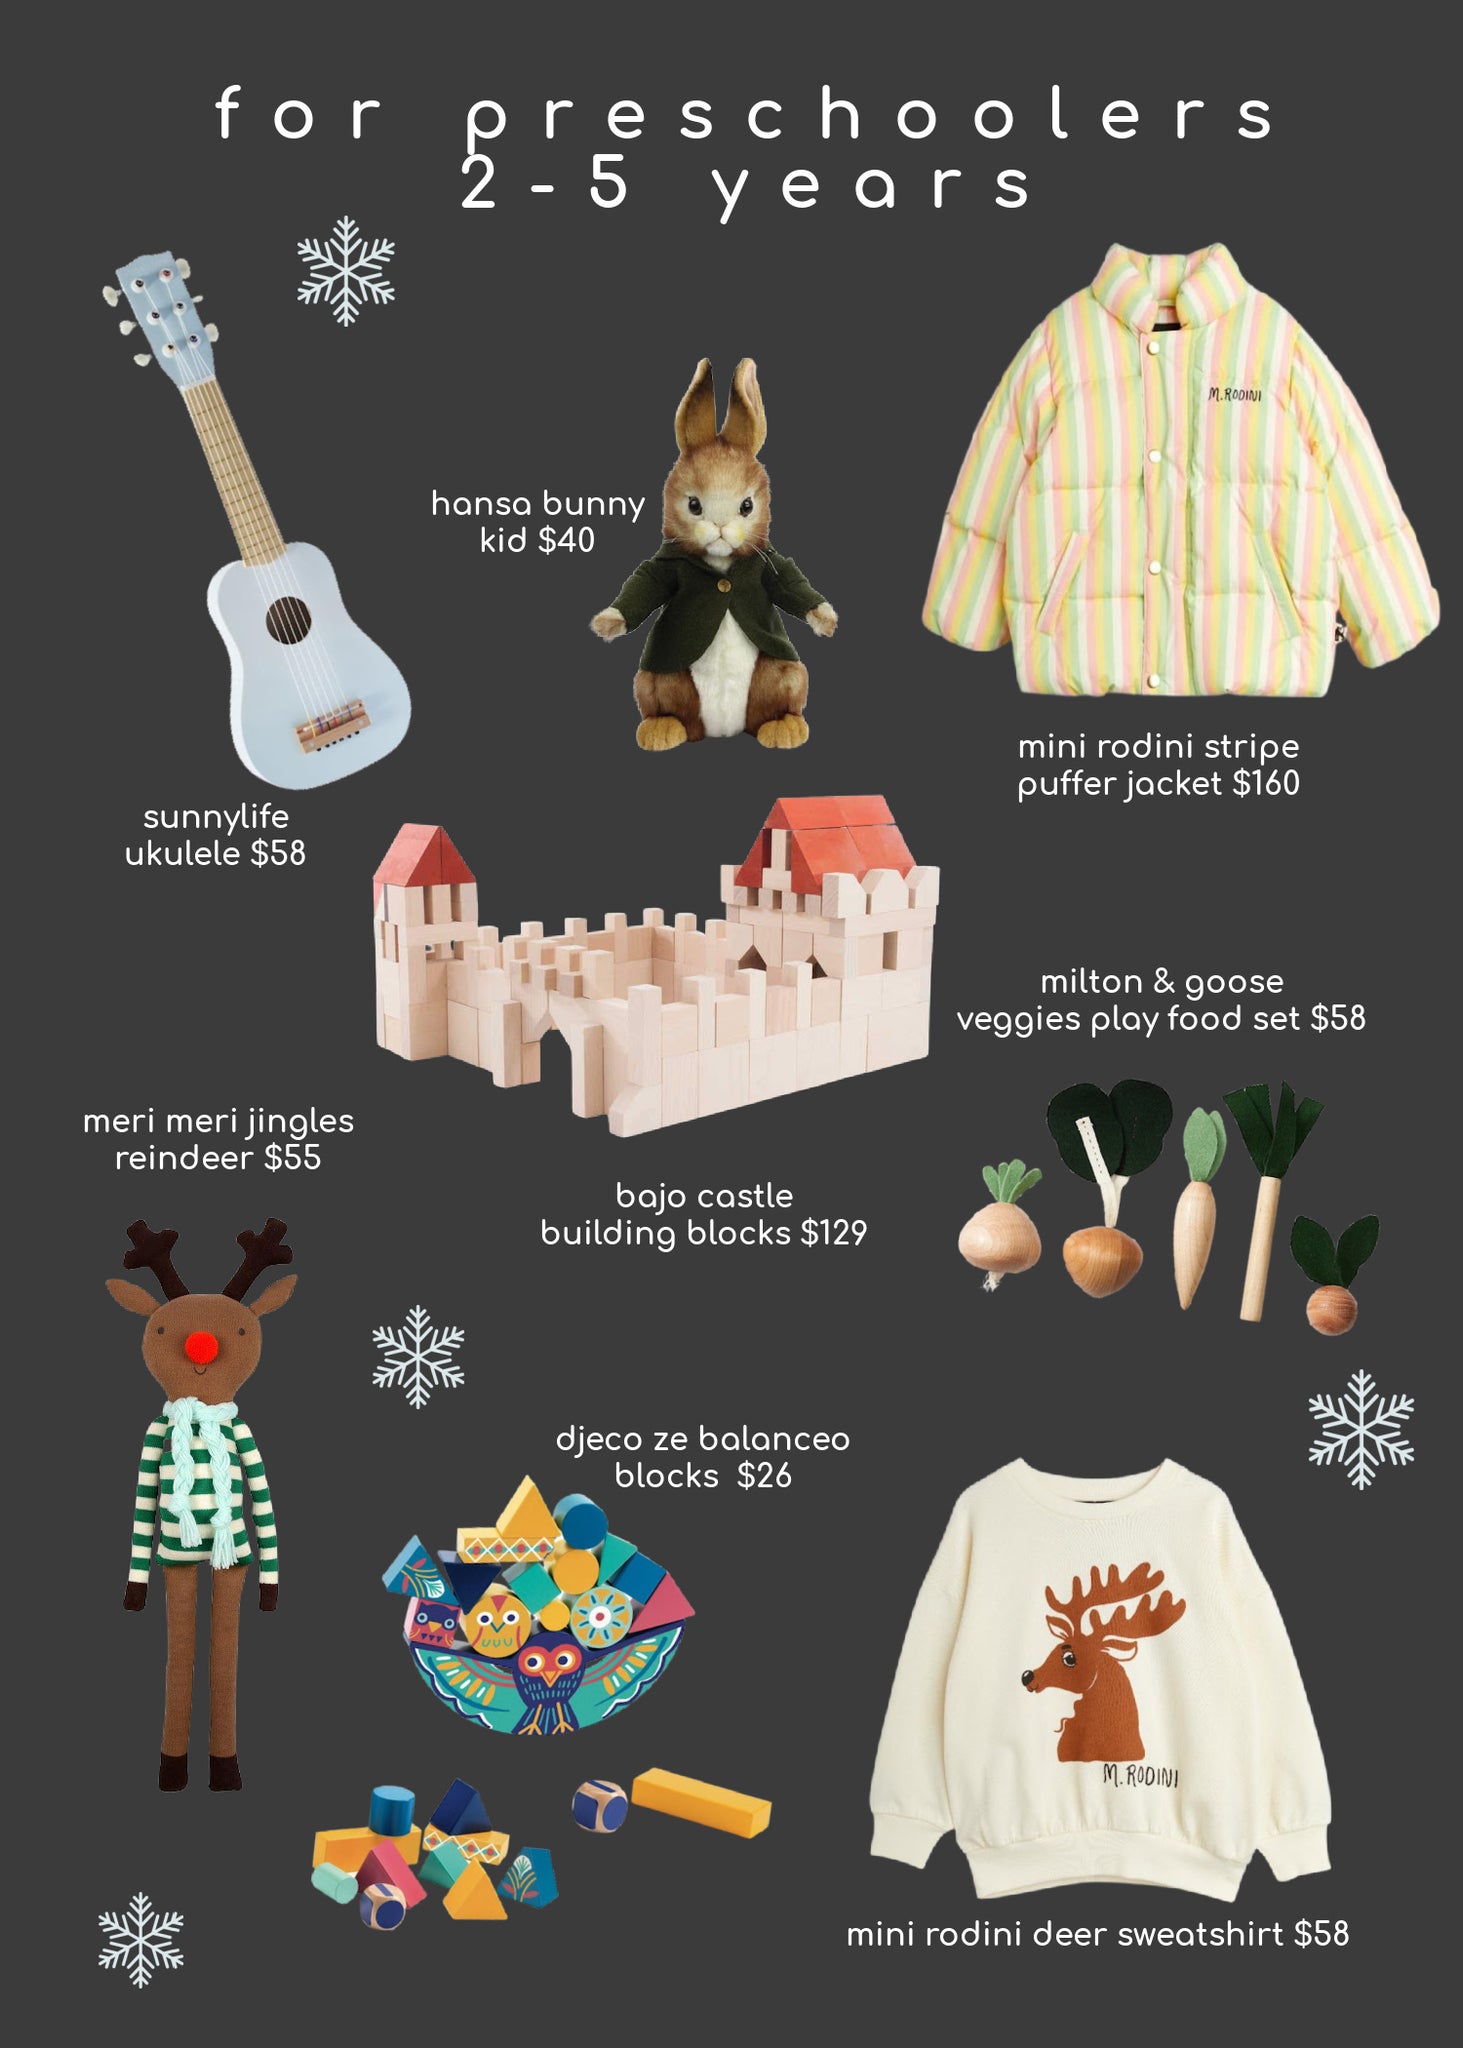 holiday gift ideas for preschoolers